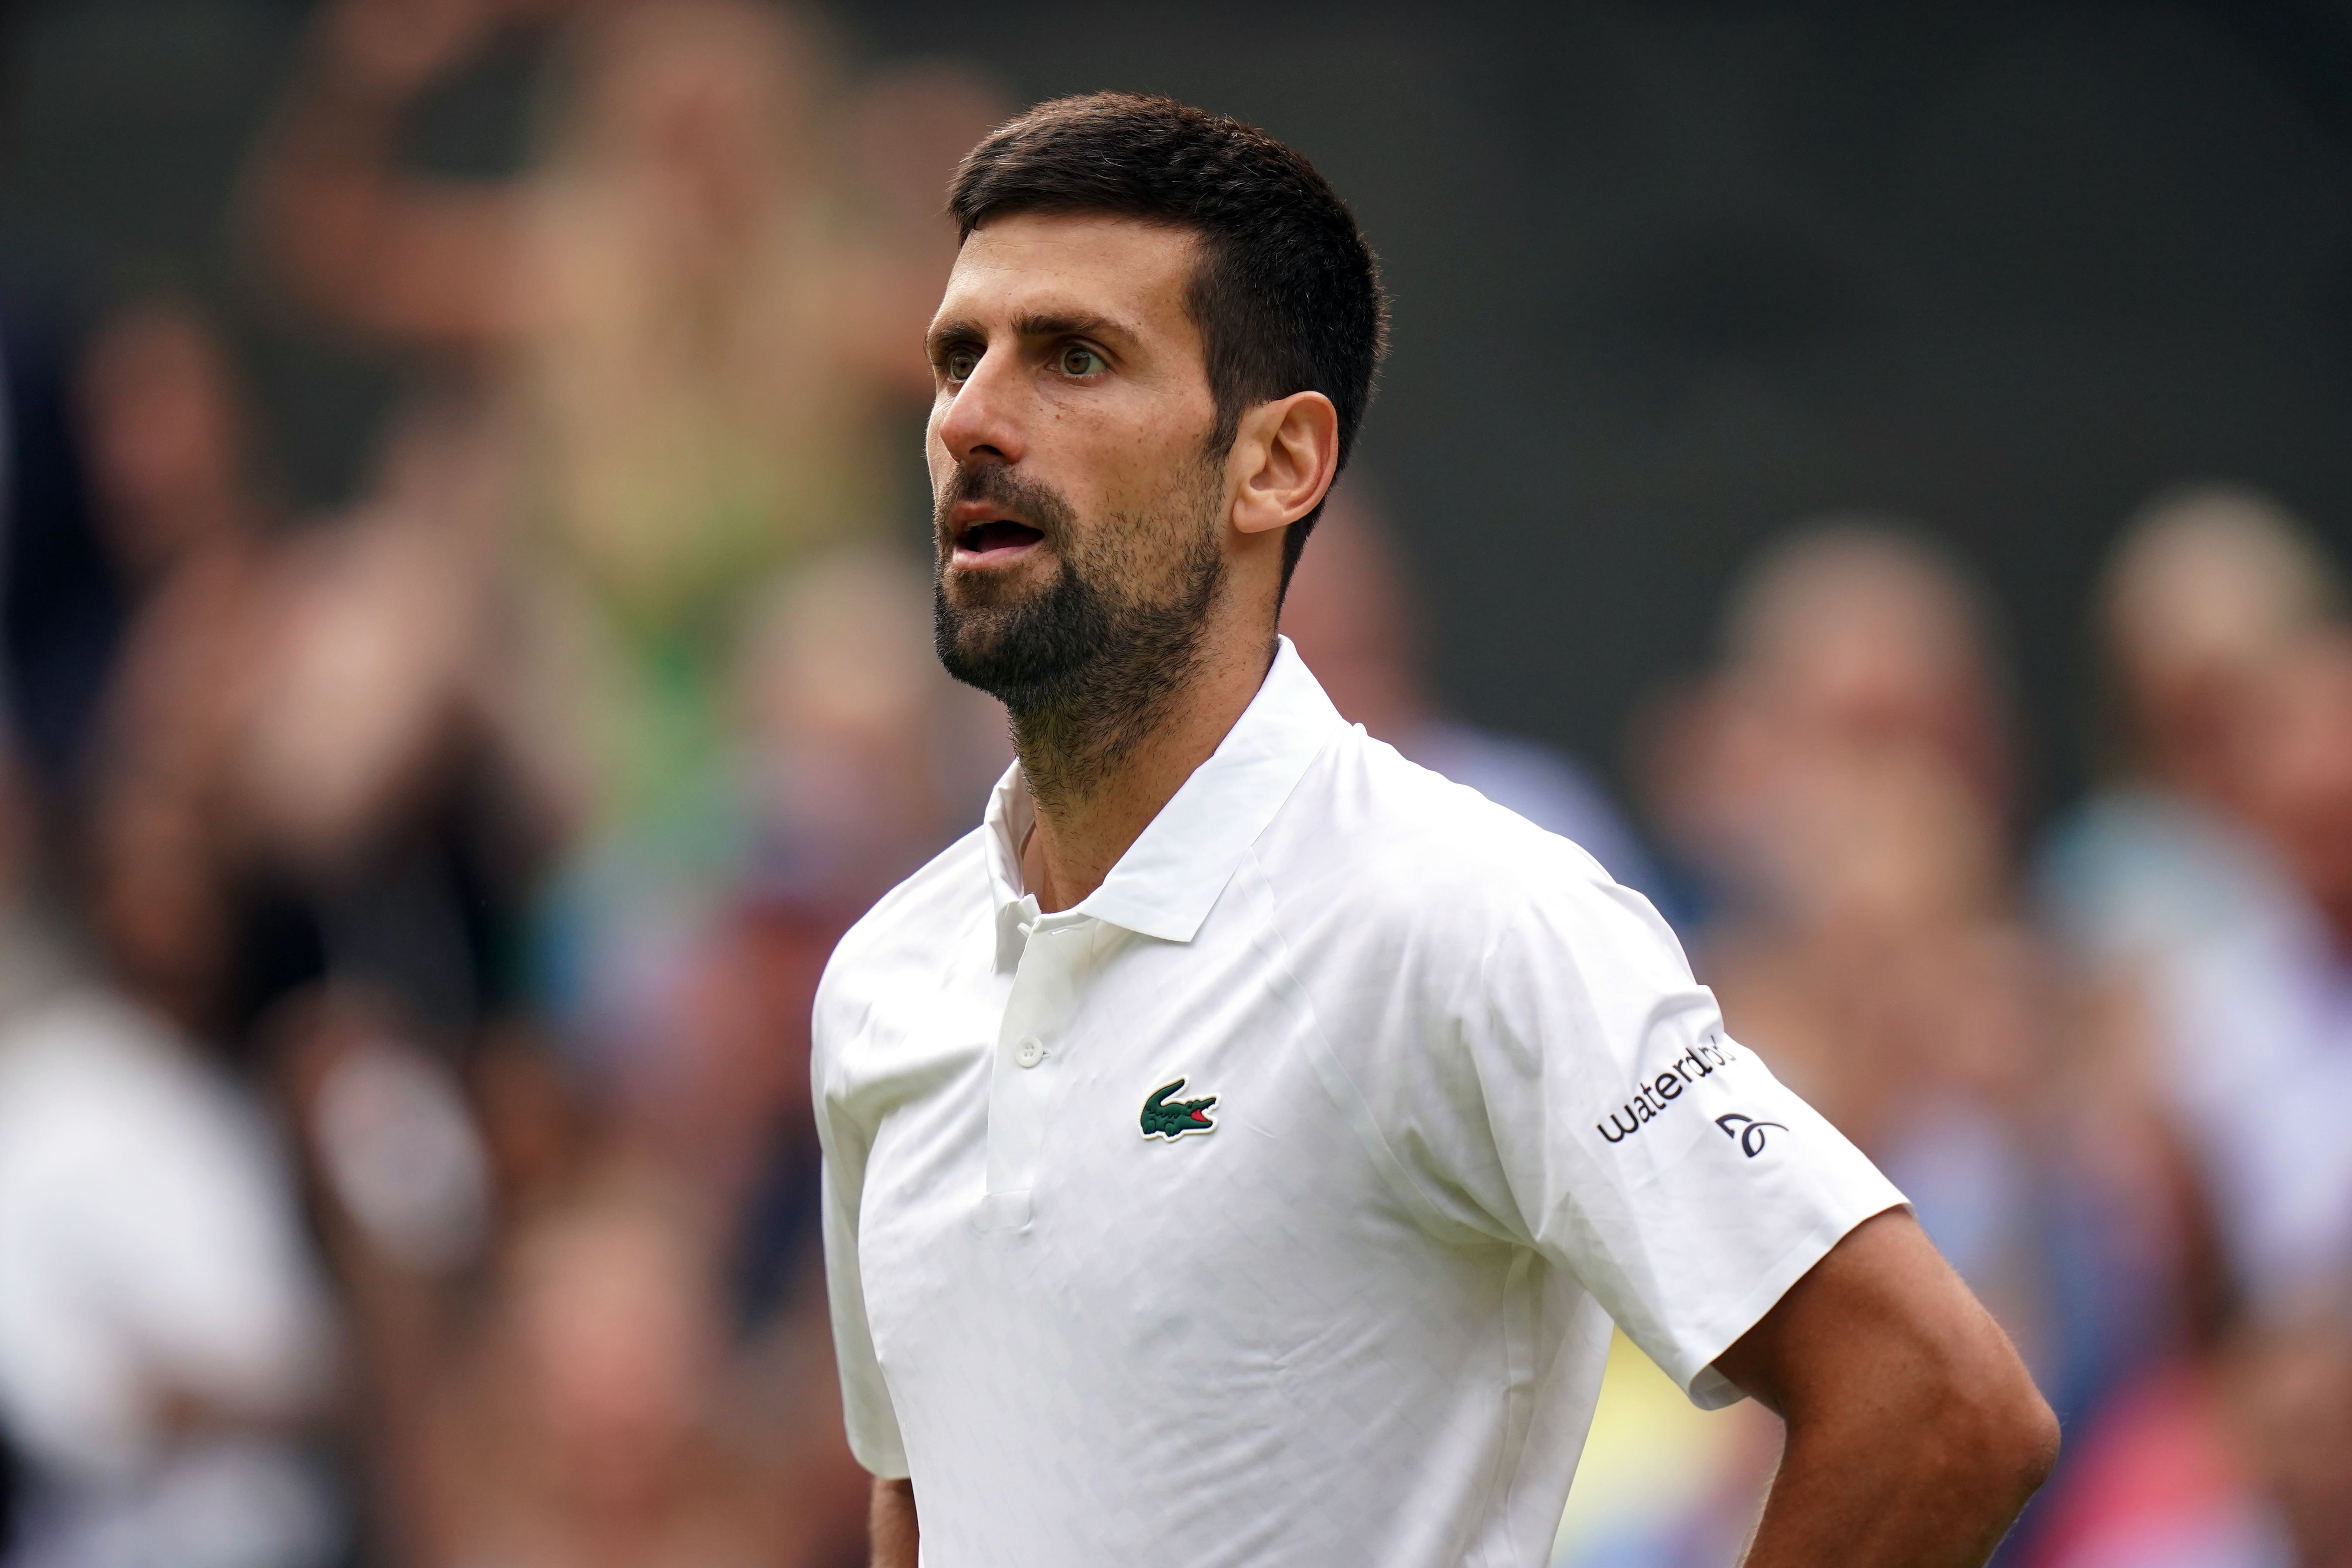 Djokovic returns to the US after a two-year absence